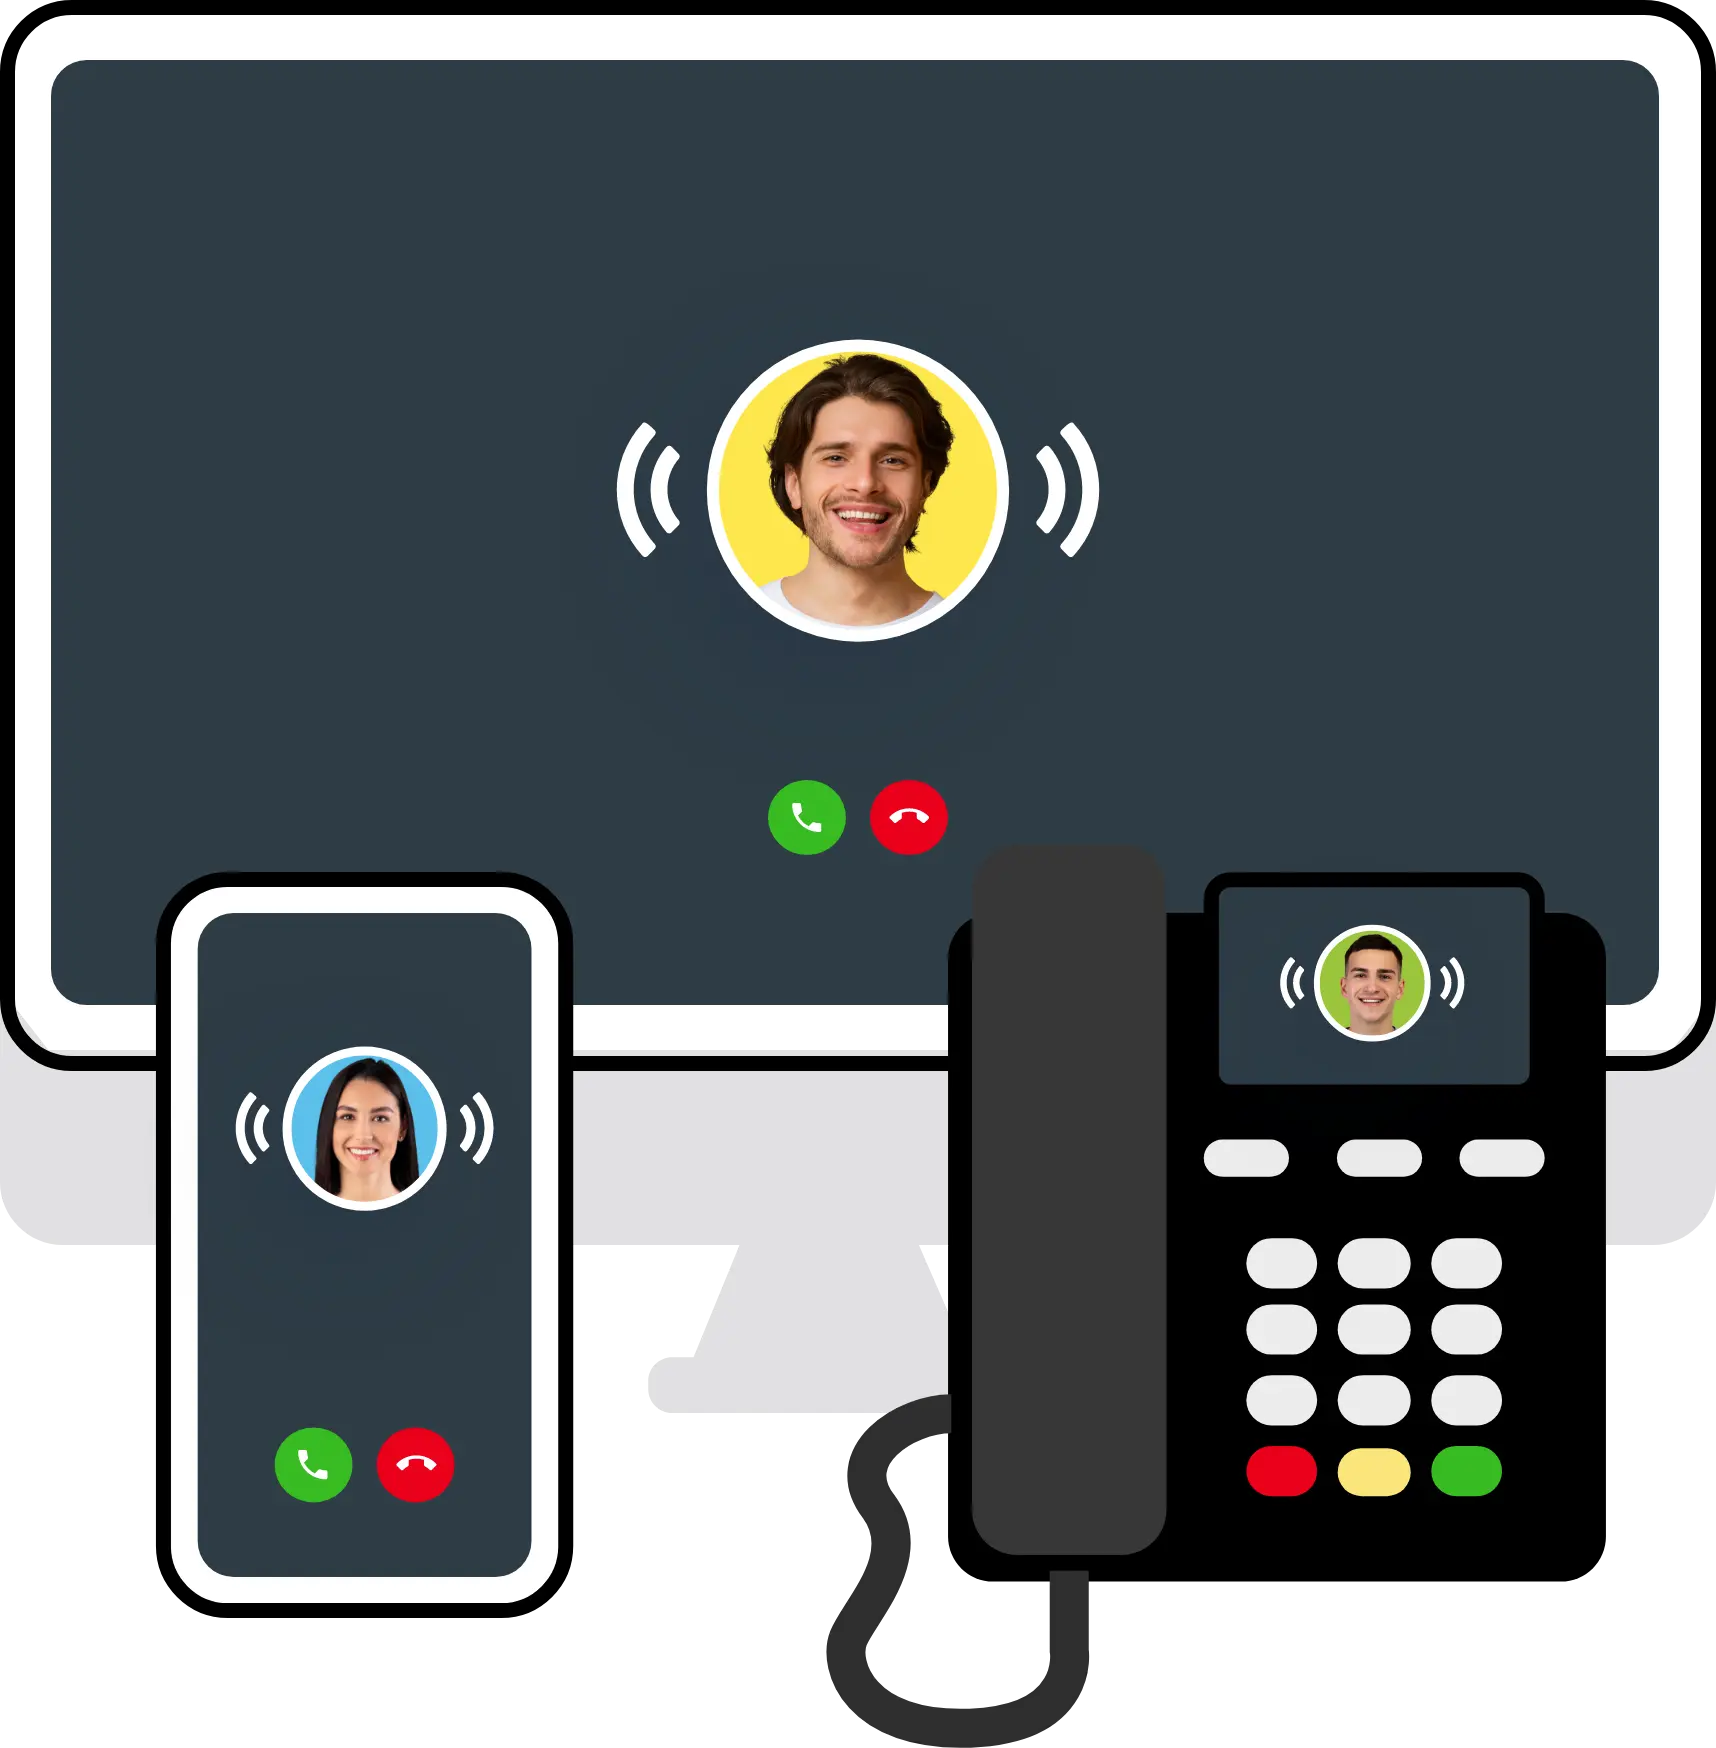 Voip phone system working like your telephone system